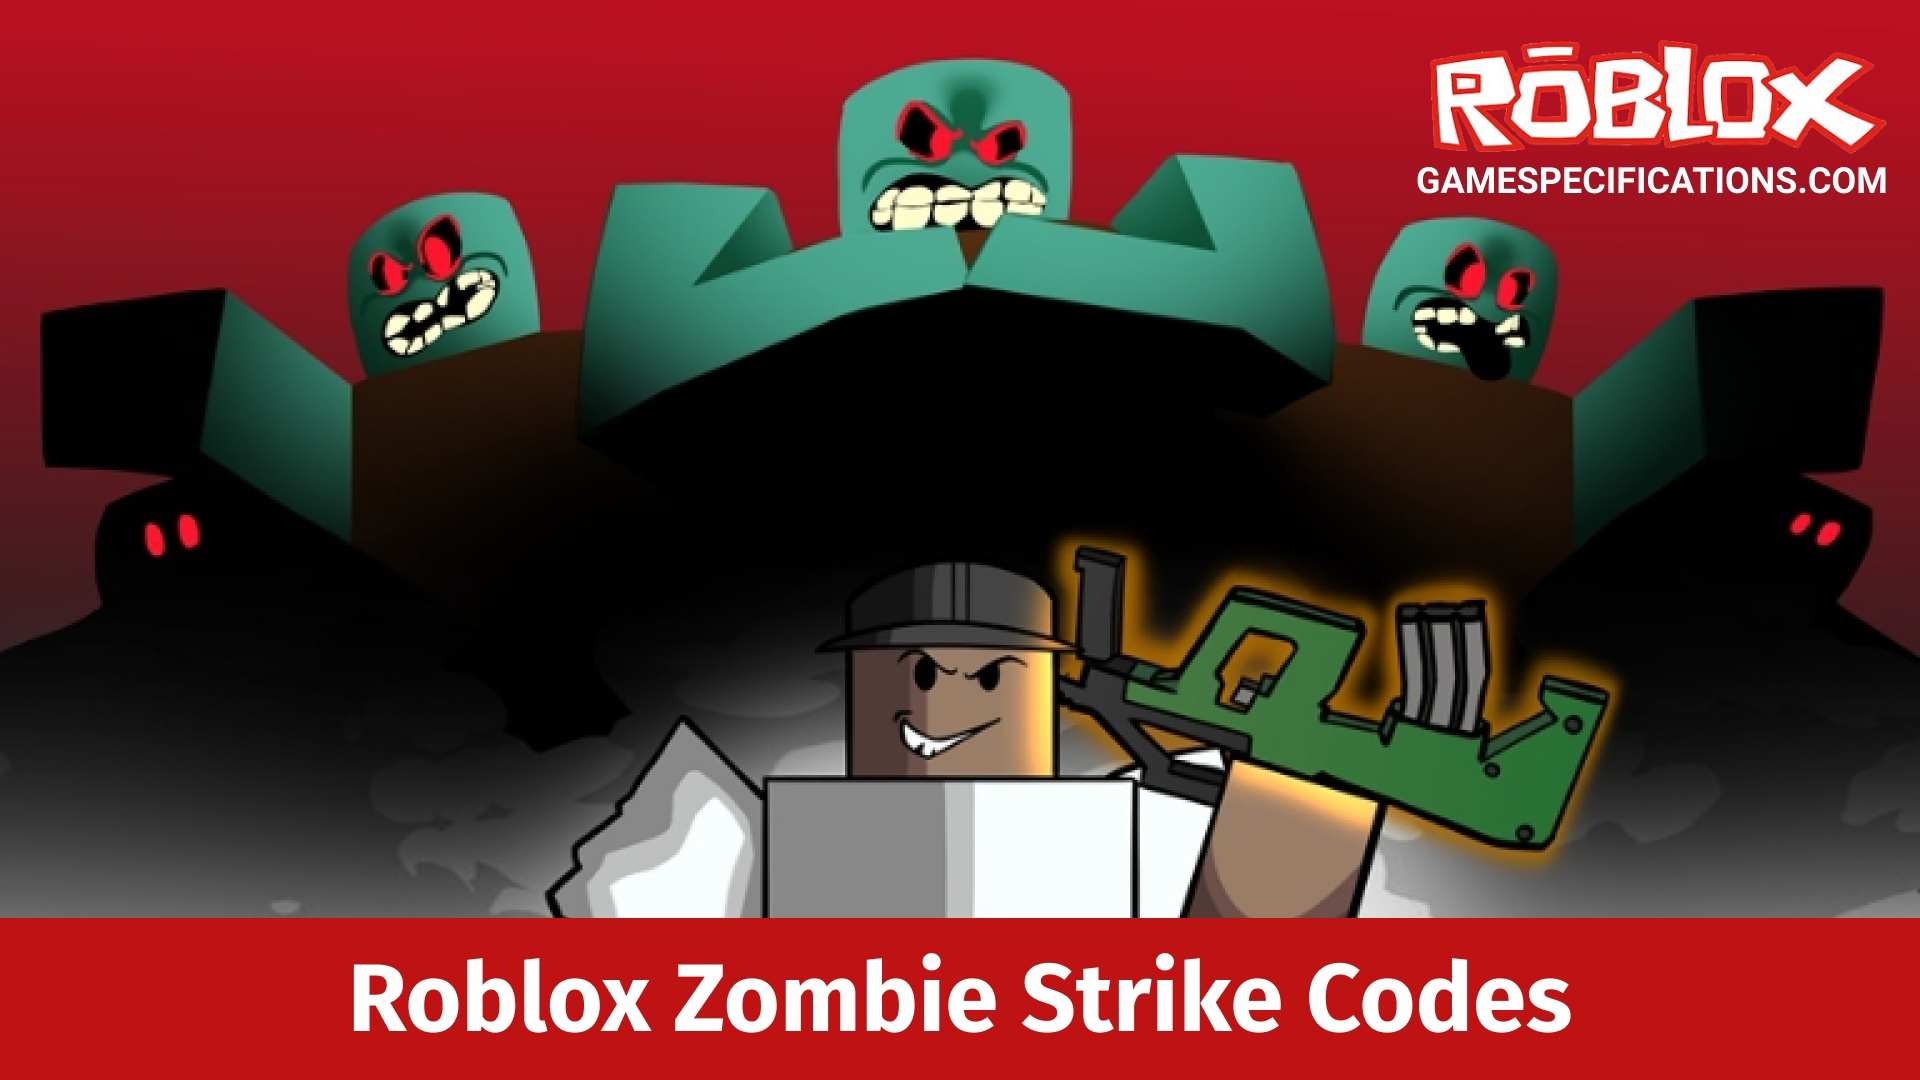 Roblox Zombie Strike Codes July 2021 Game Specifications - codes for game dev life roblox